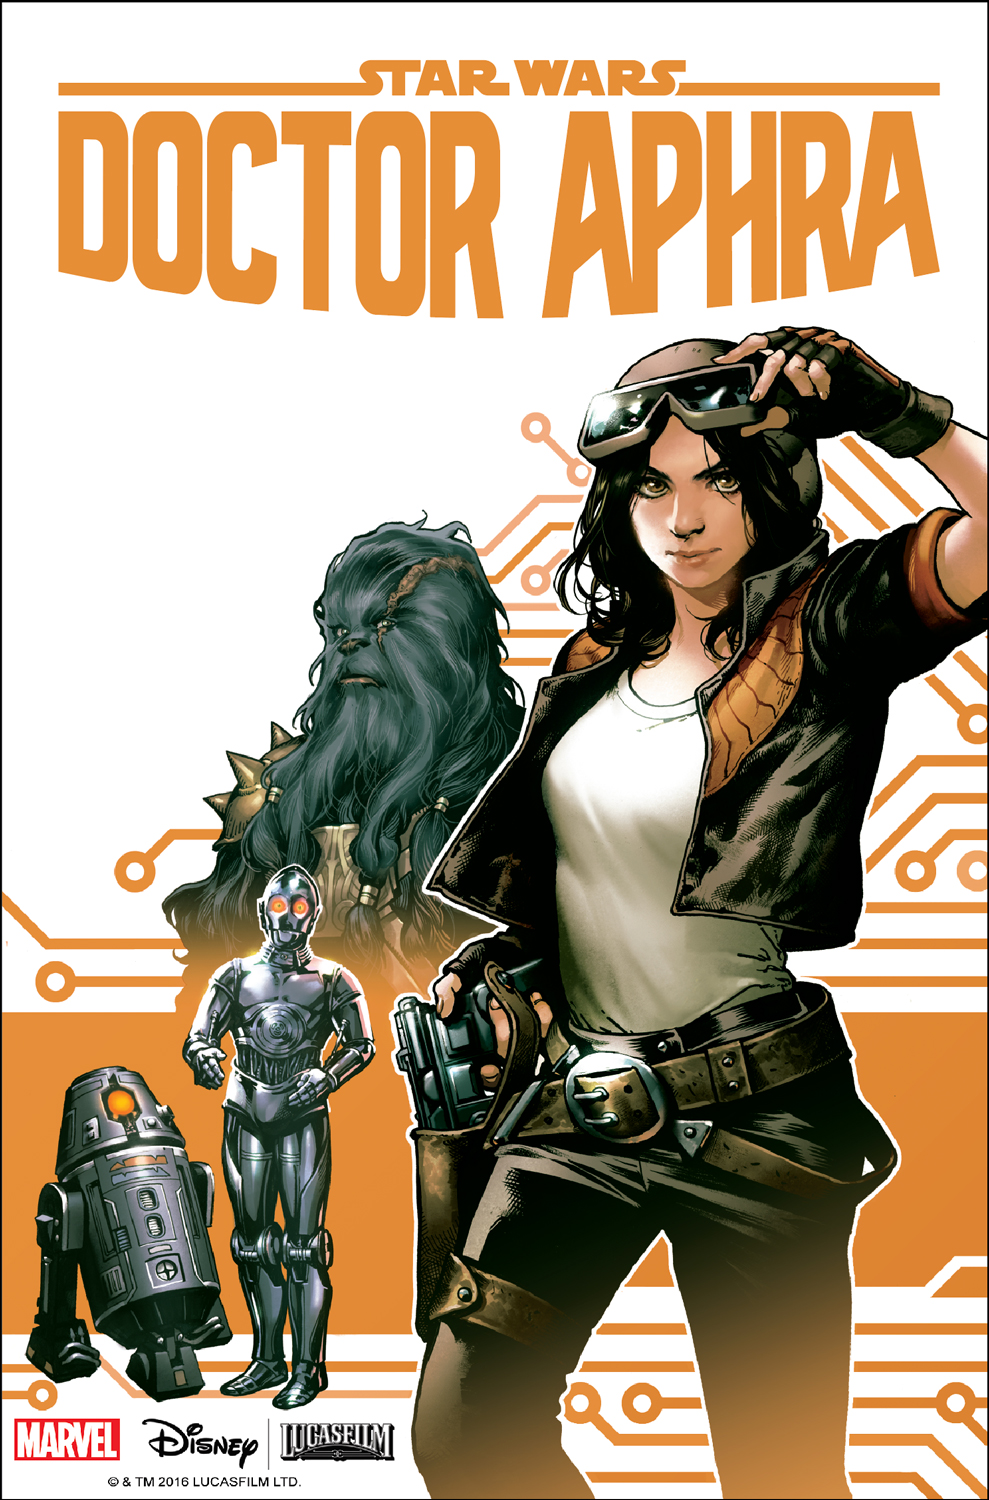 Marvel Comics News Digest 10/10 – 10/14/16 With Doctor Aphra, Renew Your Vows, and And Ending A Beginning